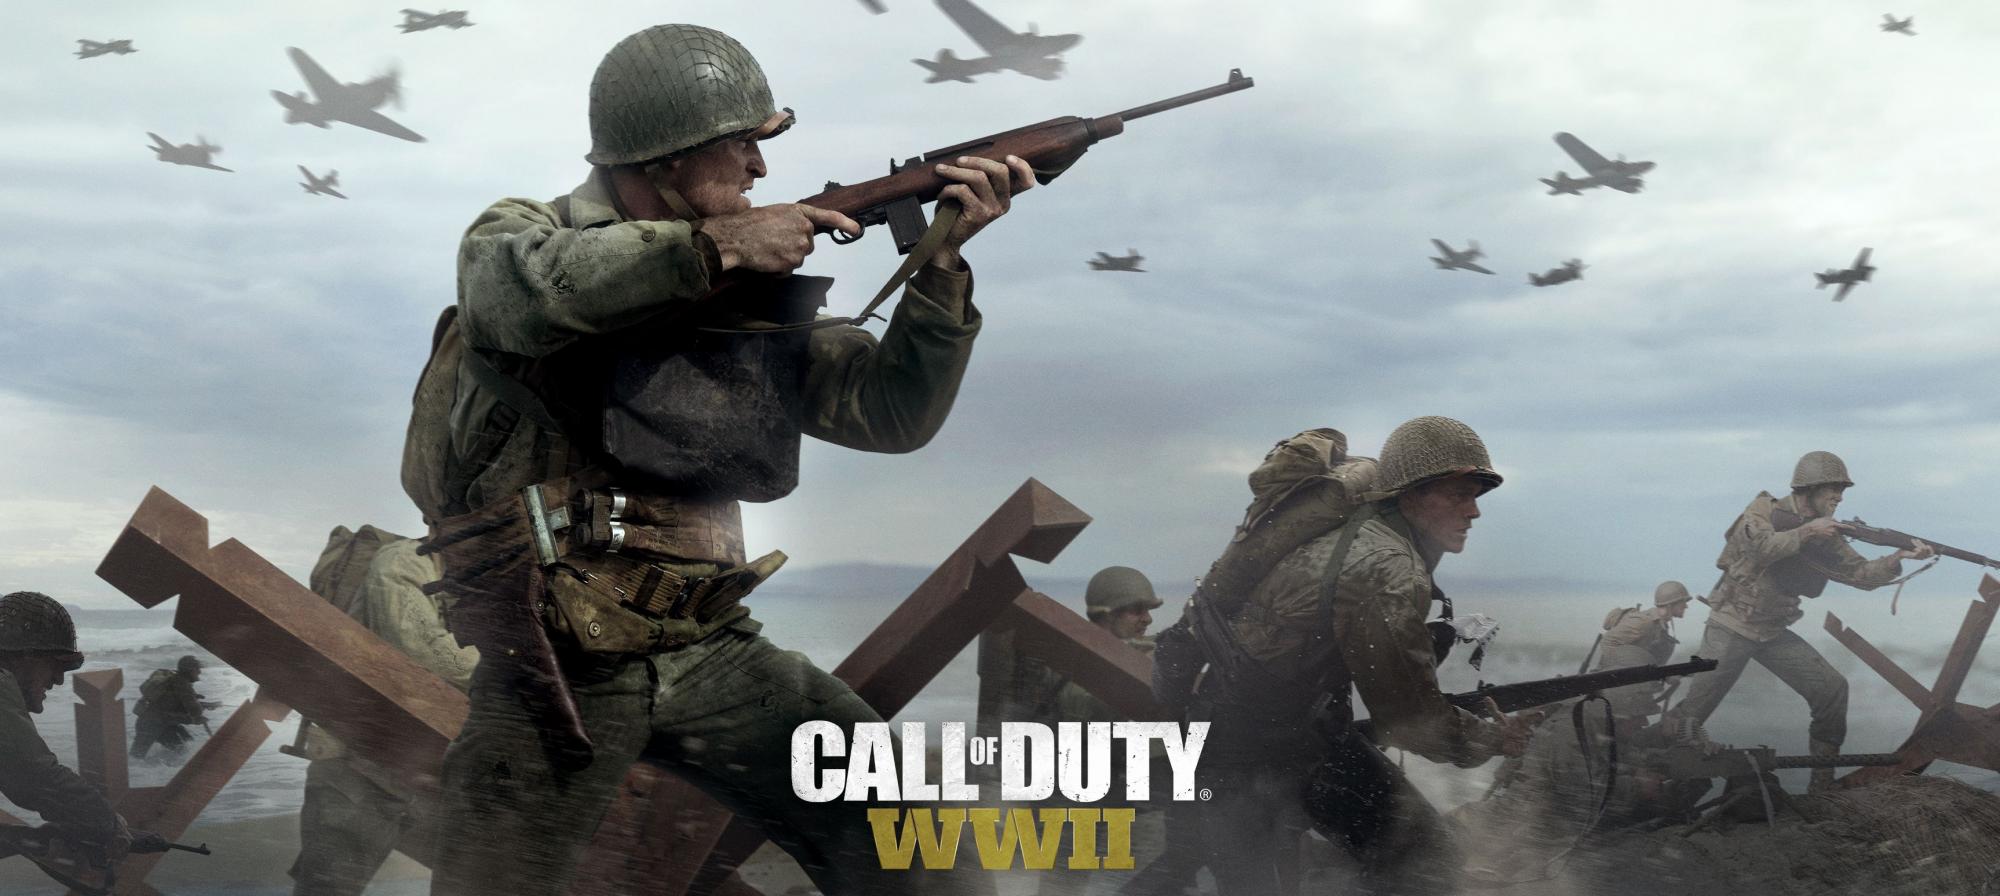 How to Install CALL OF DUTY WWII - KONCEPT CRACKED 